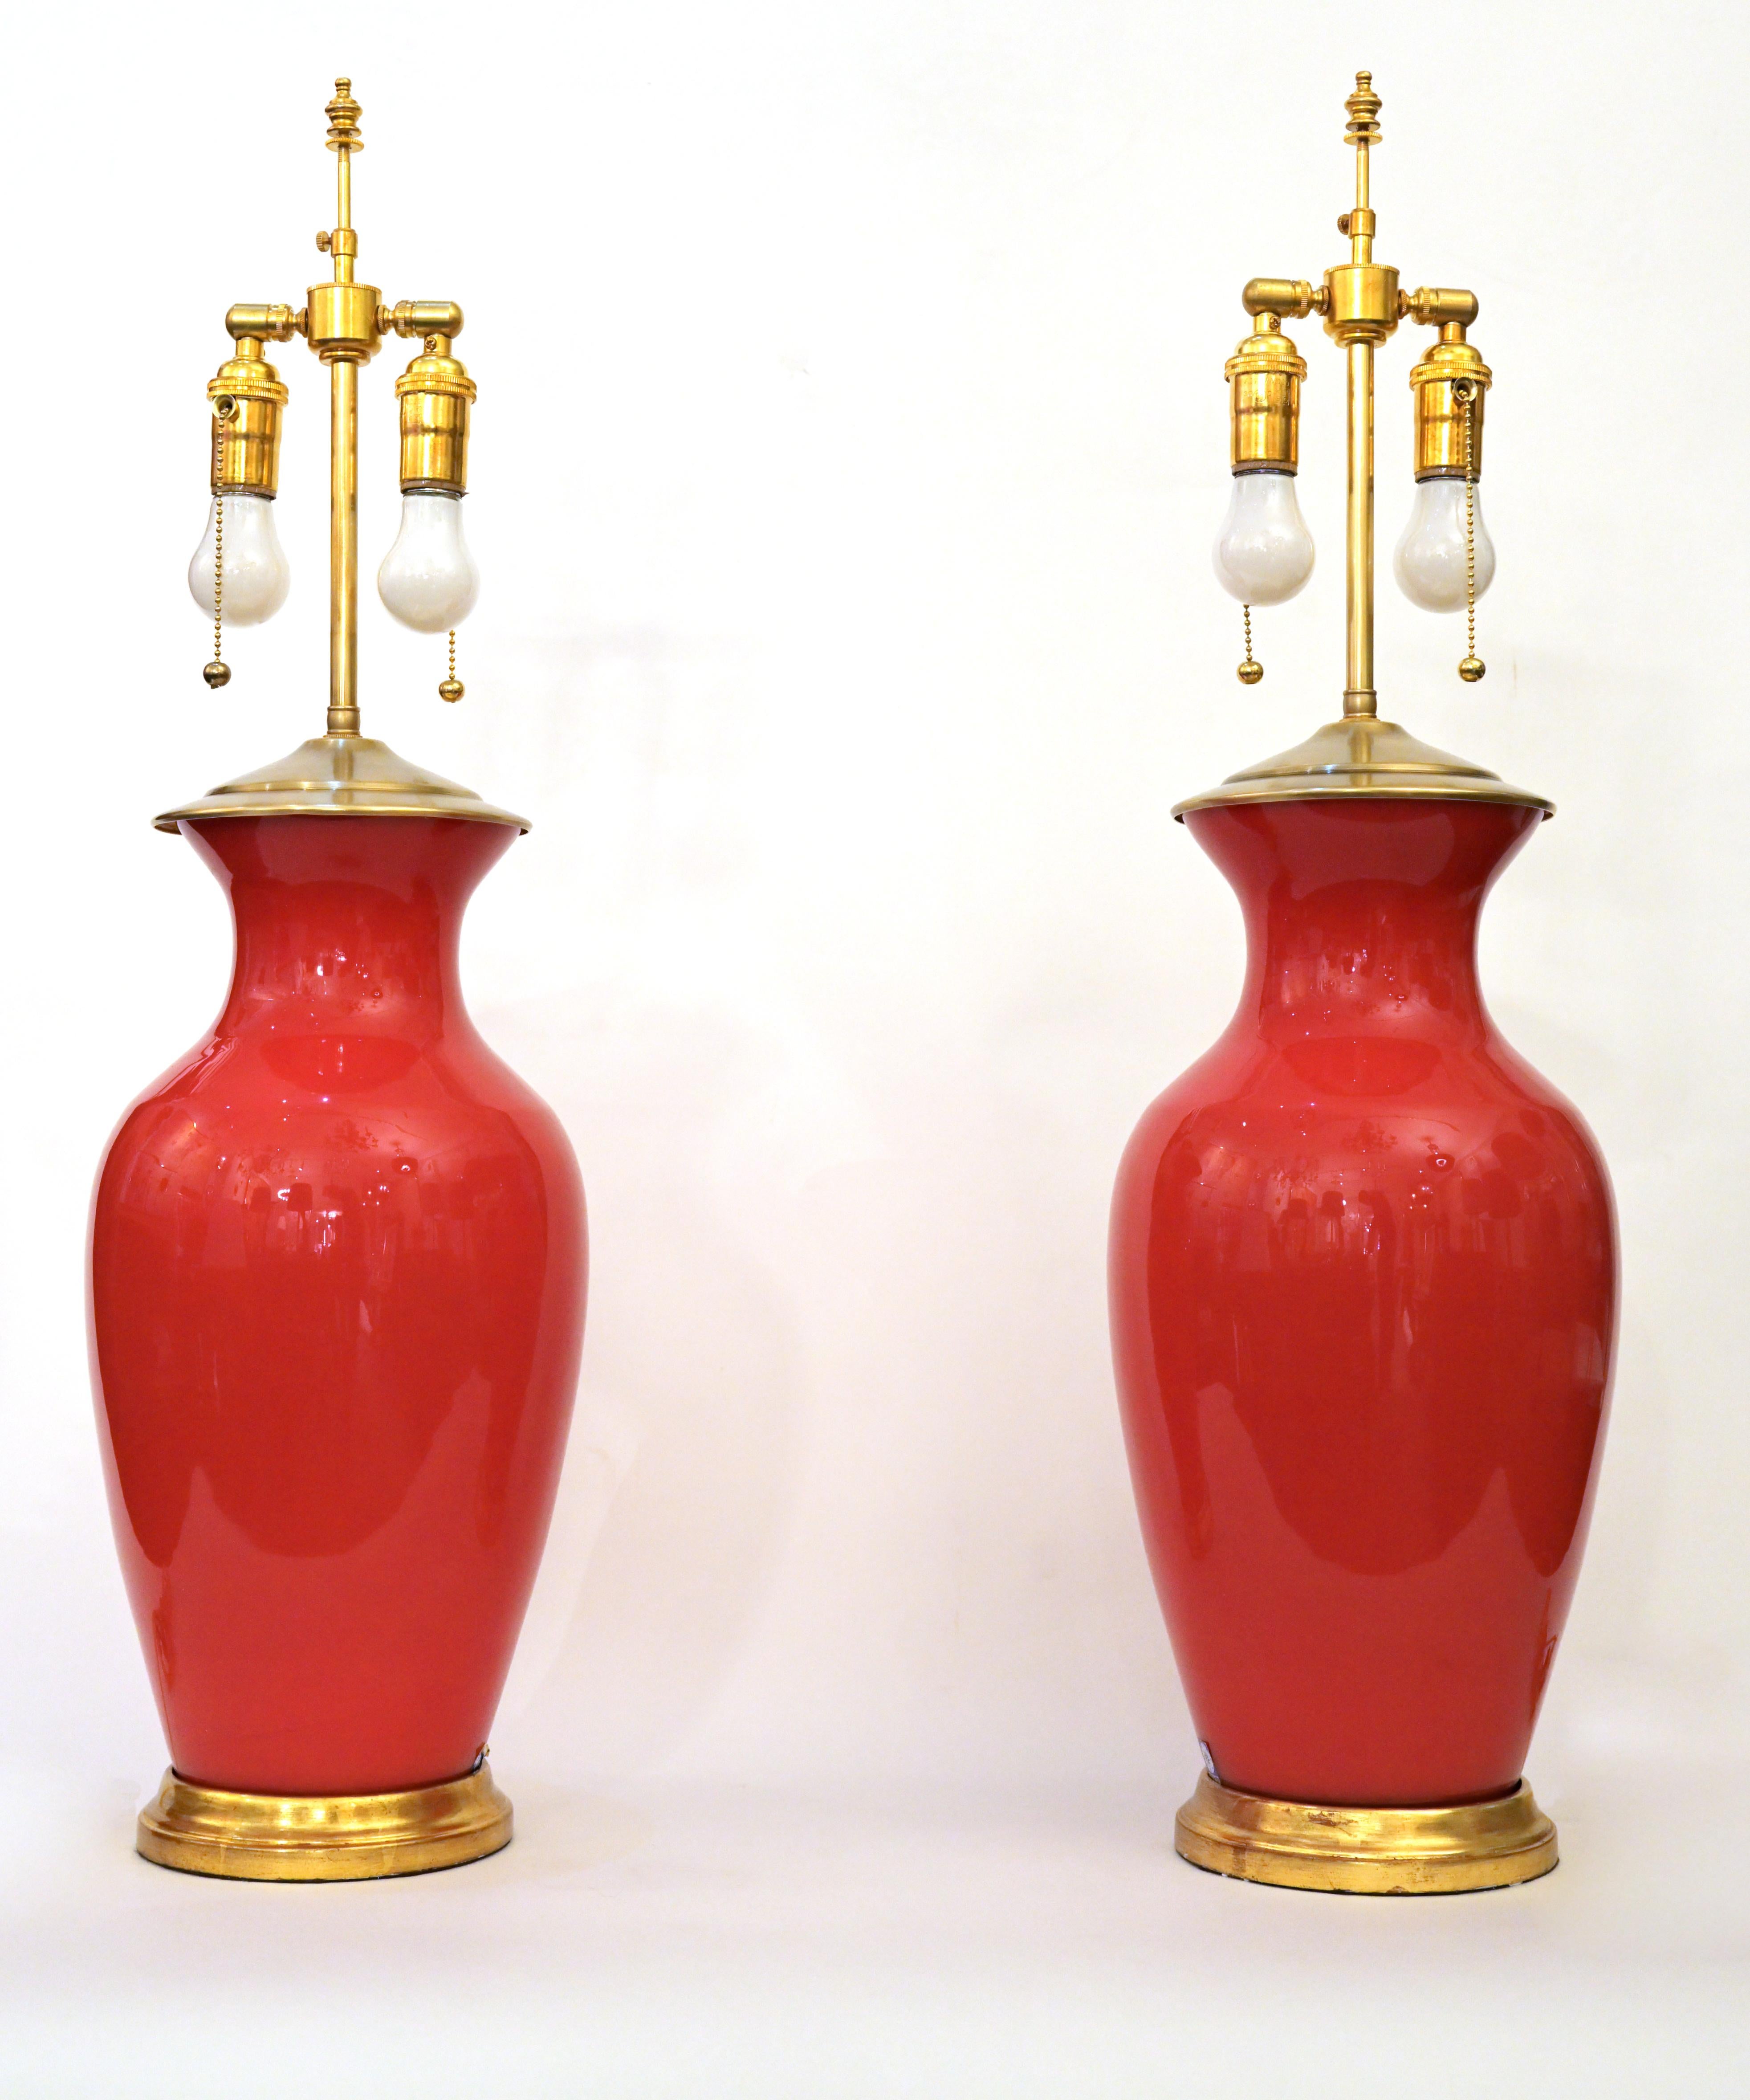 A pair of table lamps made from vintage Murano Glass Lamps having gilt wood bases and brass finials with adjustable double cluster, each sockets with 60 watts maximum. Shades are not included.

Center Diameter: 8